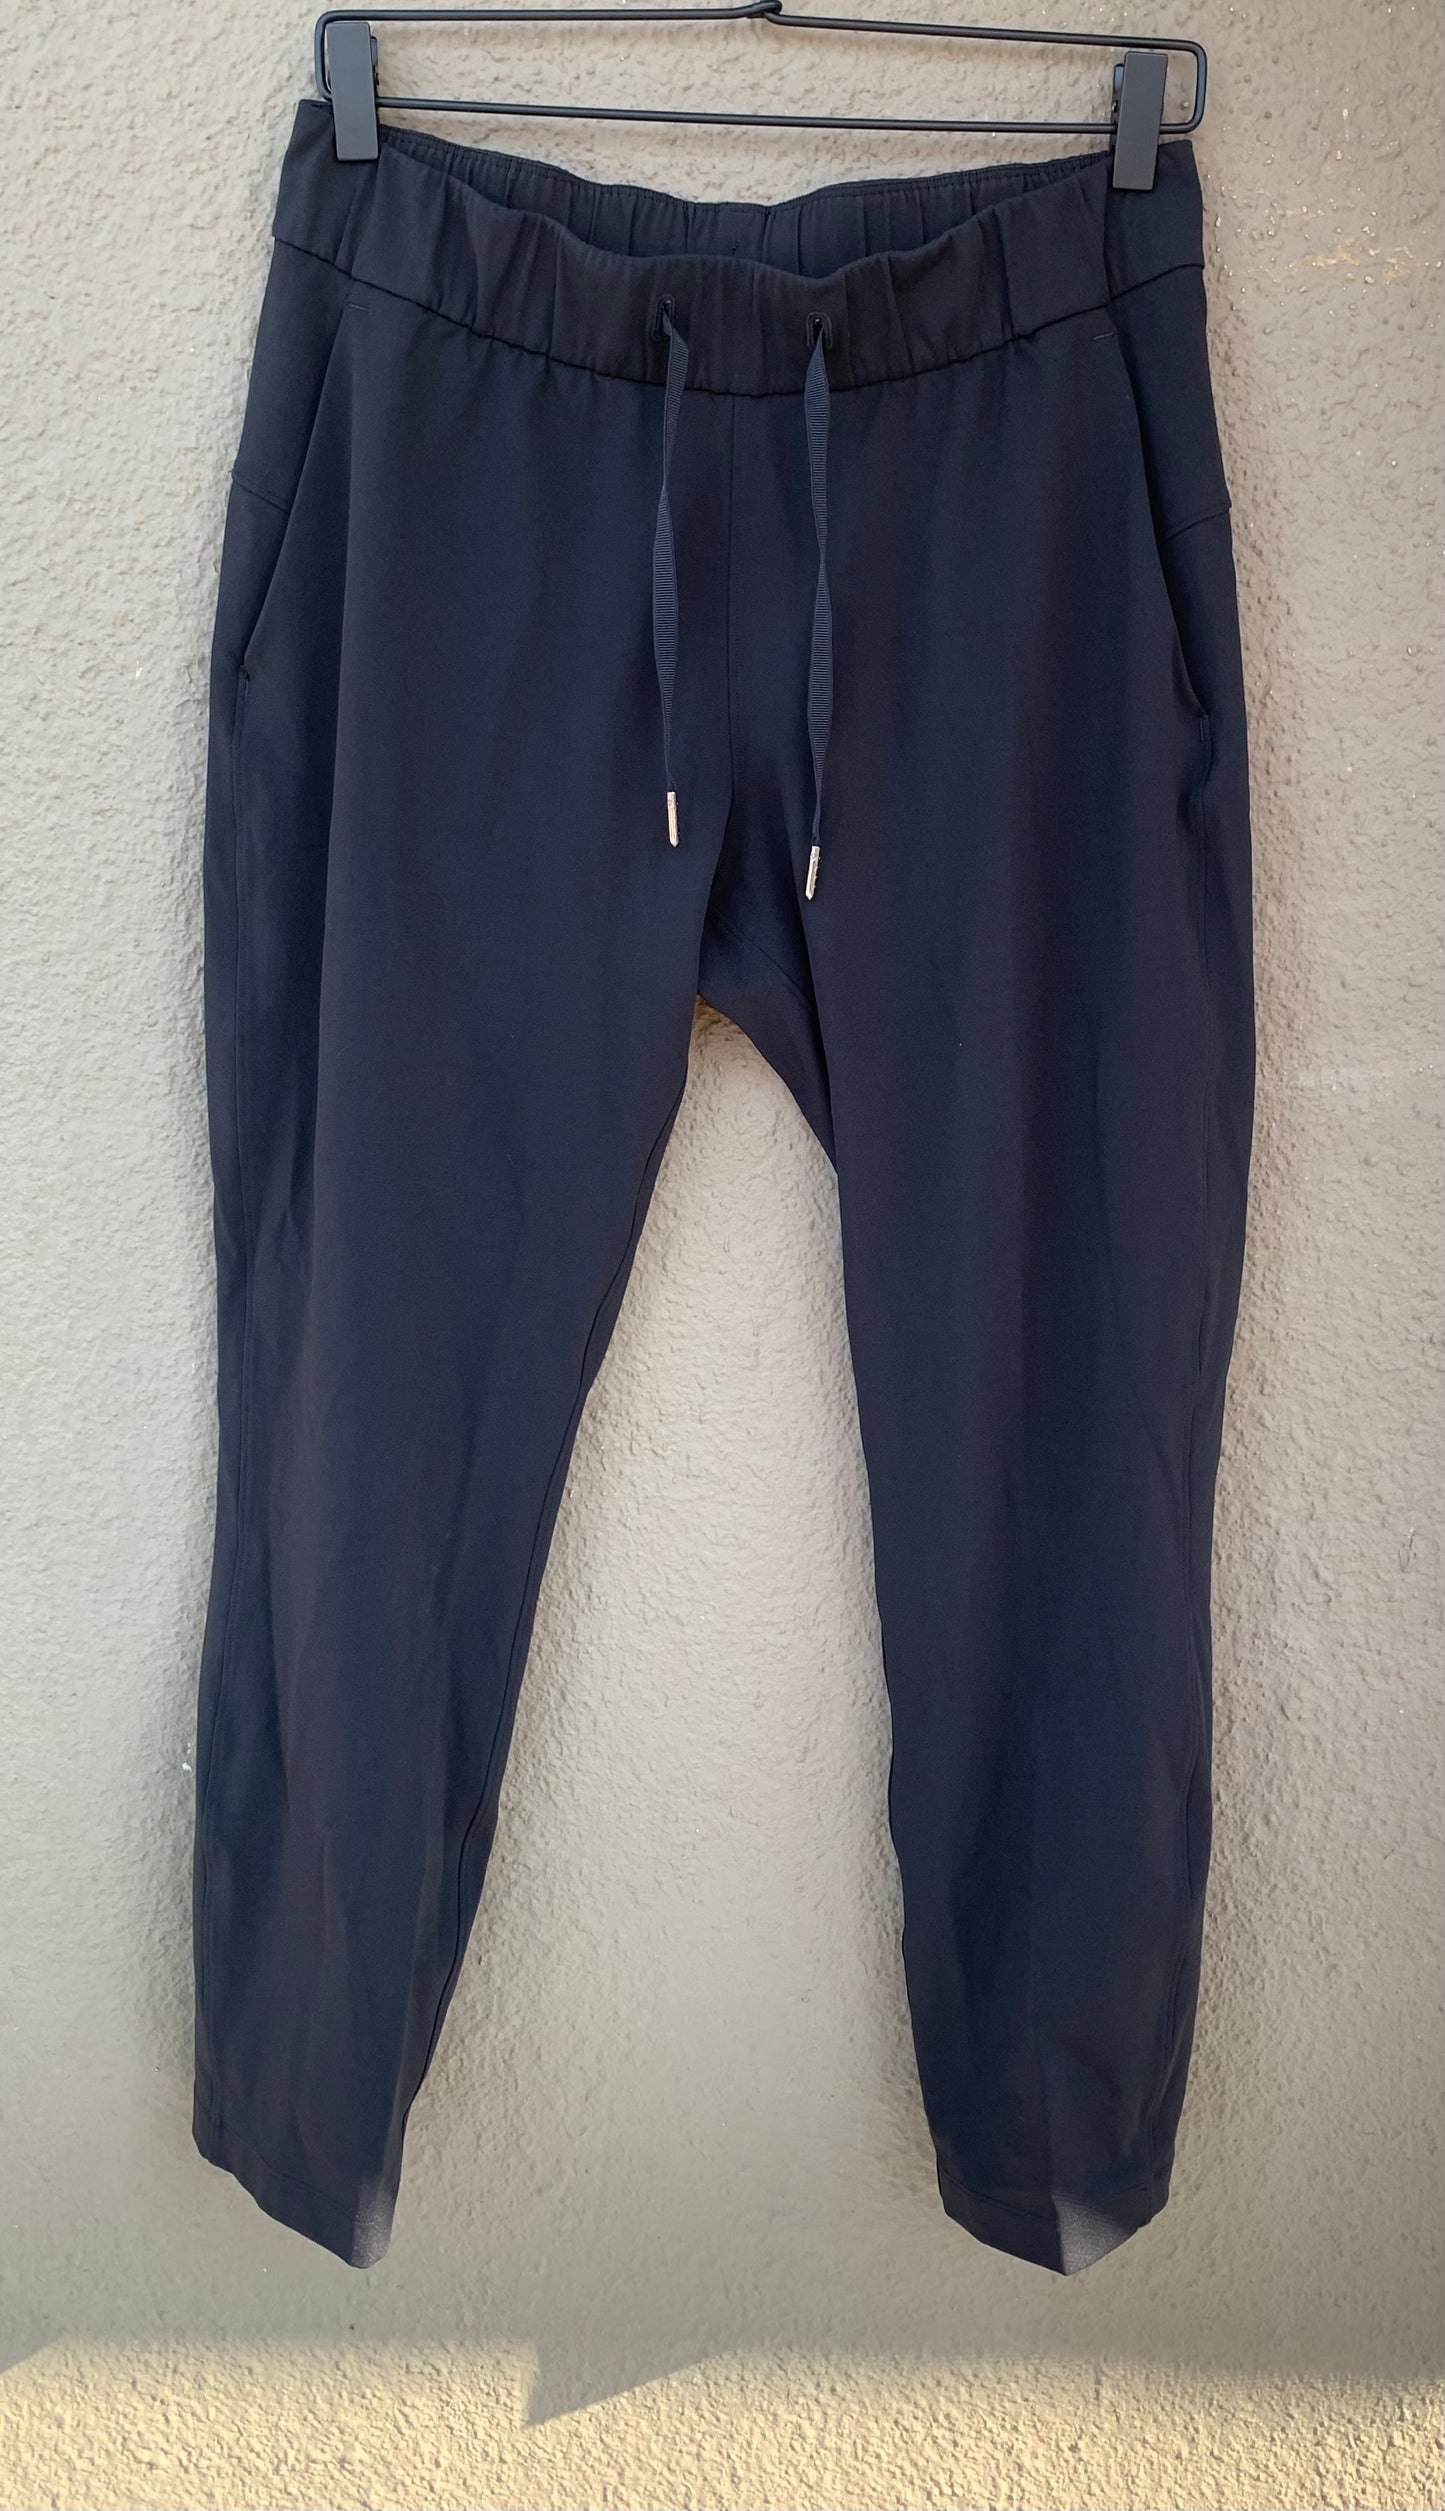 lululemon On The Fly 7/8 Pant in Black - Size 6